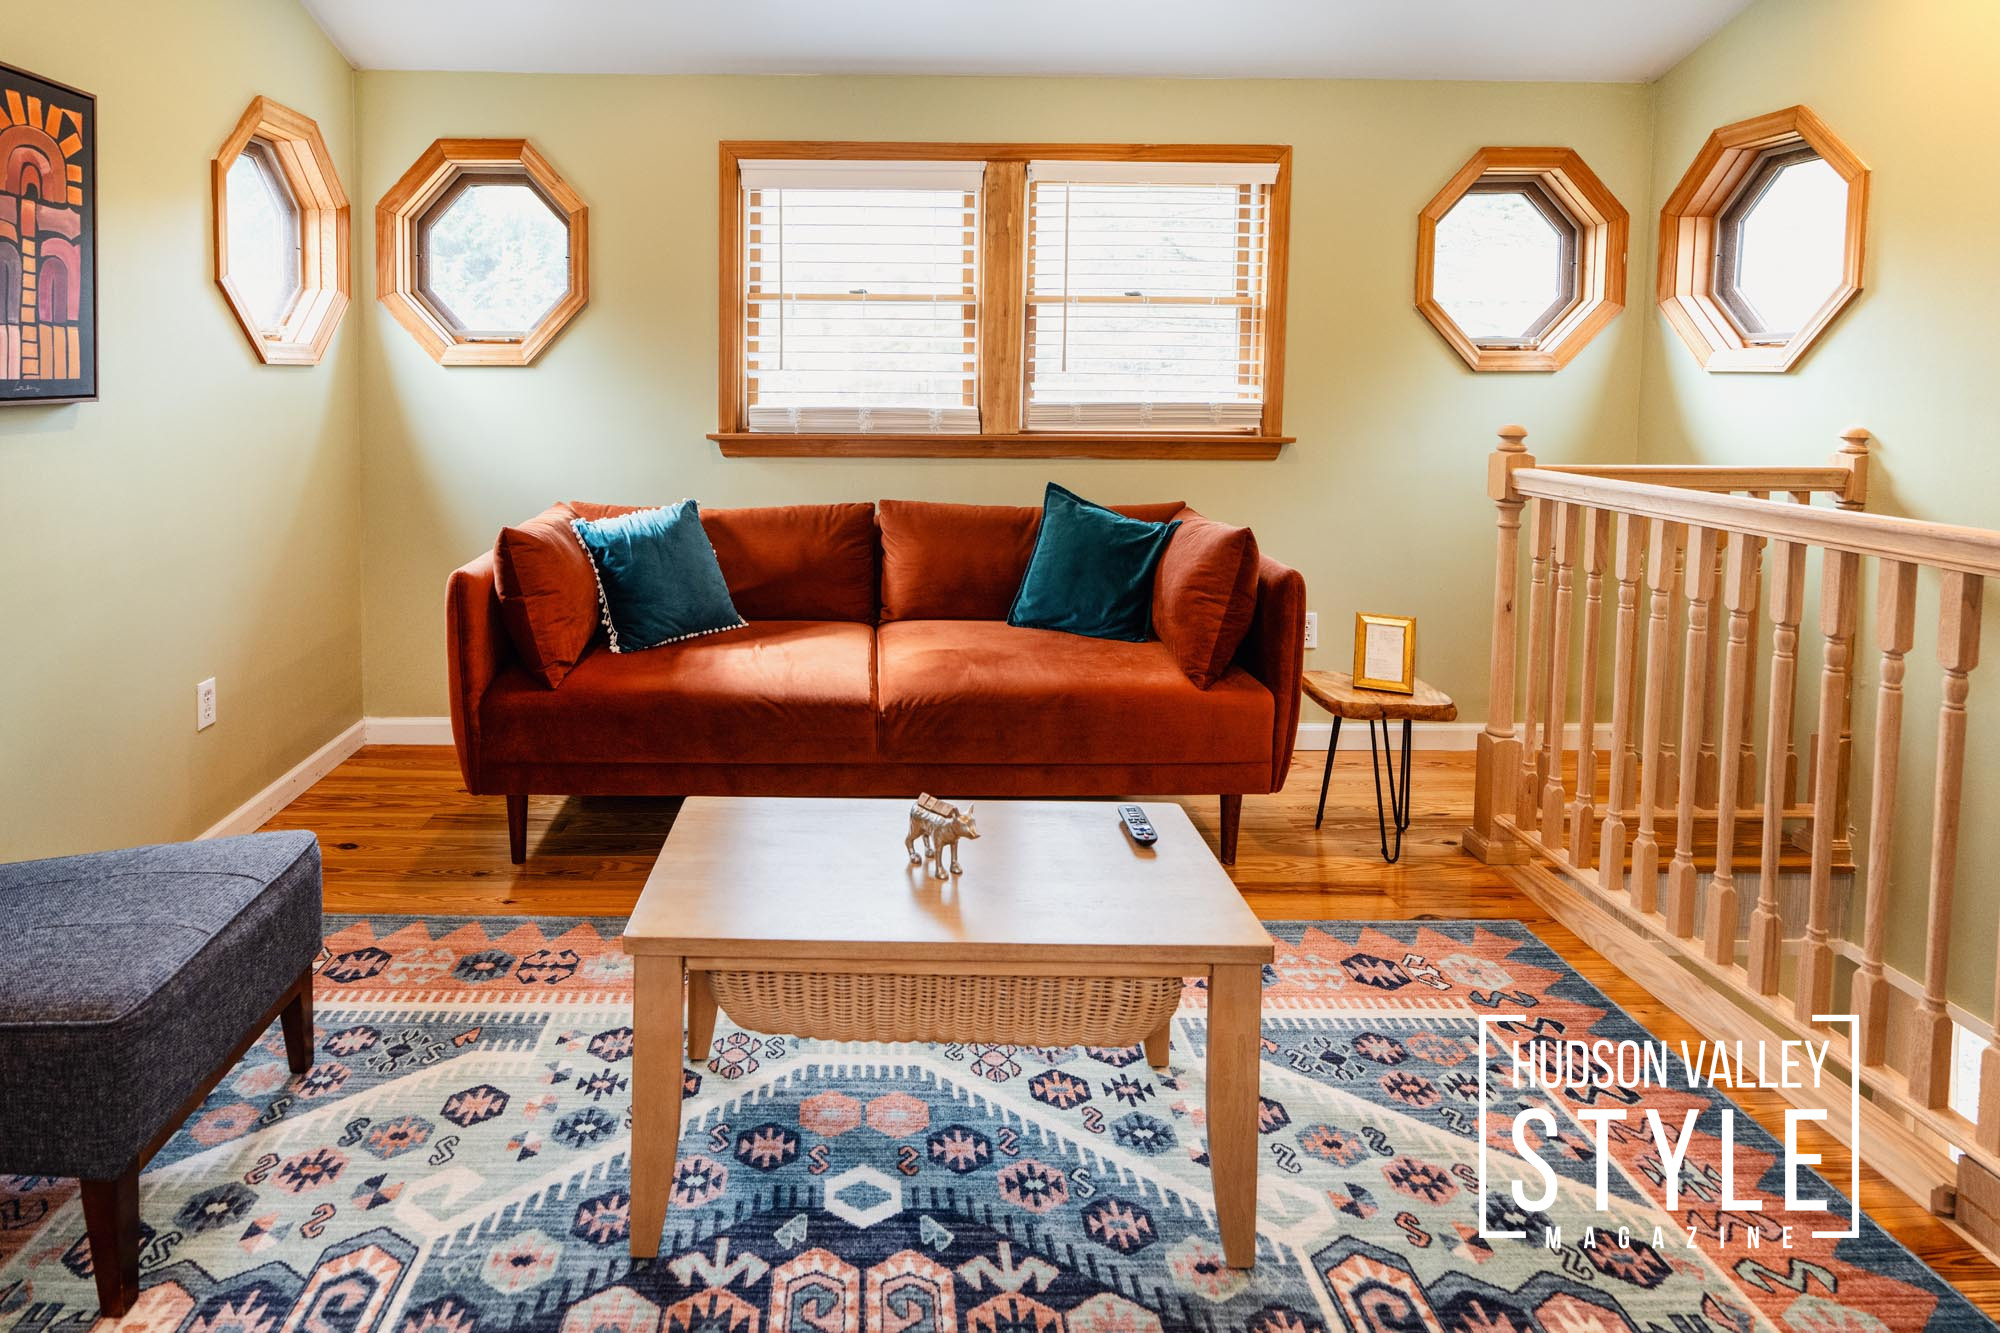 Catskills Cabin Living: Combining Rustic Charm with Modern Amenities - Experience the Best of Both Worlds – Presented by Alluvion Vacations - Best Airbnb Cabins